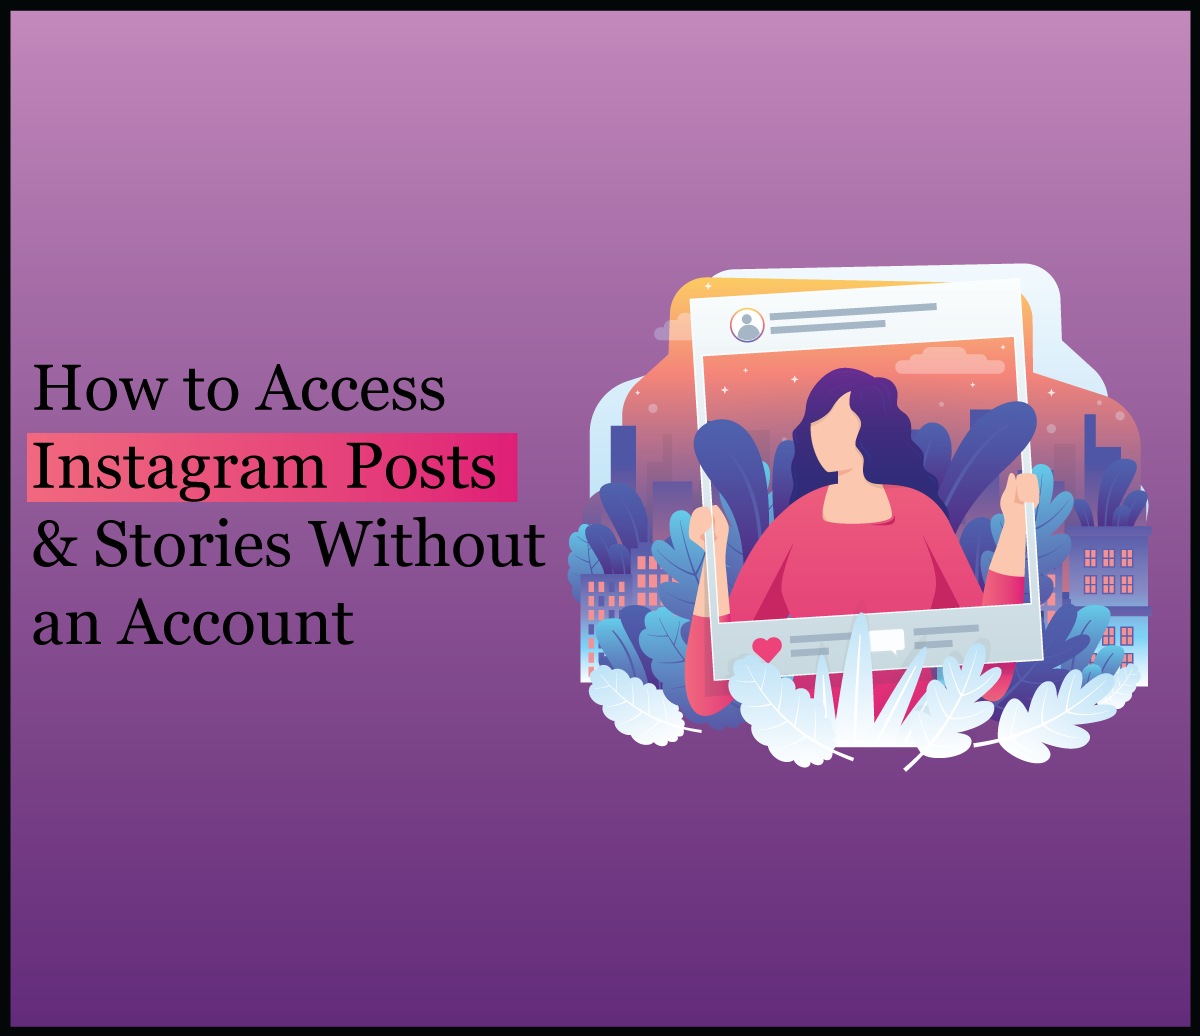 How to Access Instagram Posts & Stories Without an Account